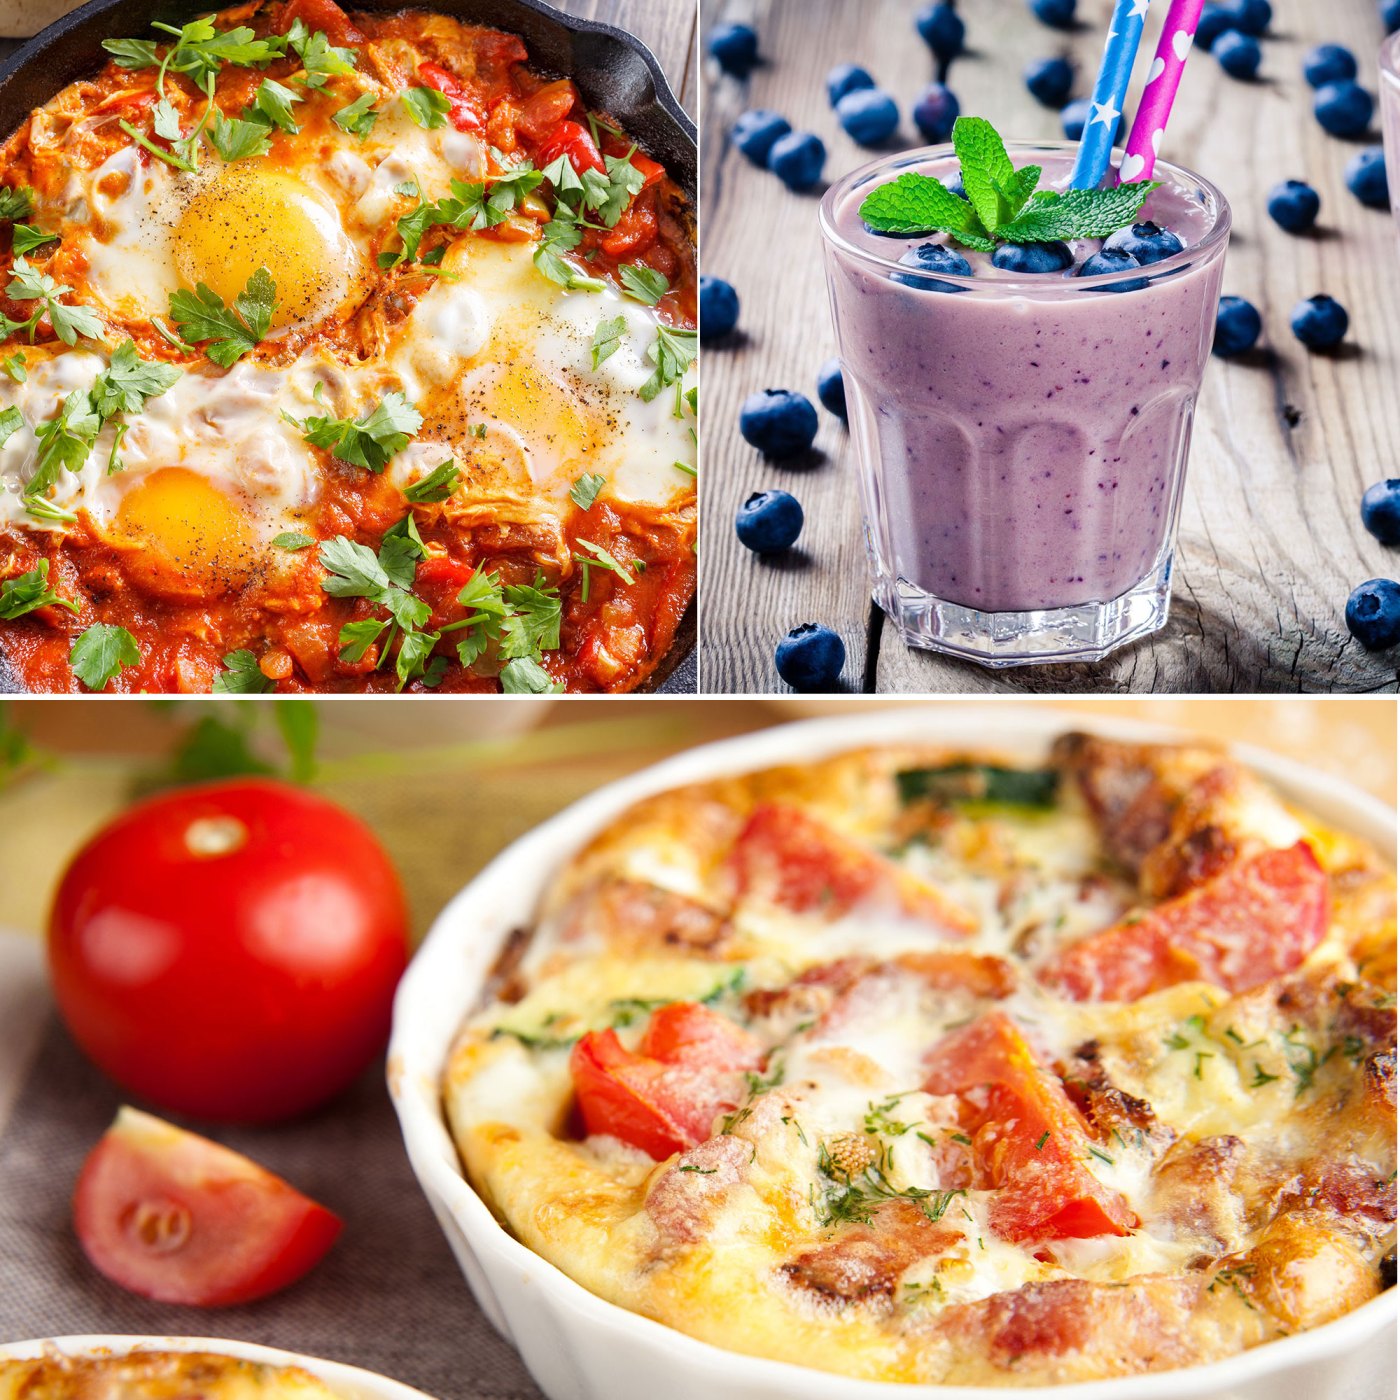 8 Easy and Delicious High-Protein, Low-Carb Breakfast Recipes